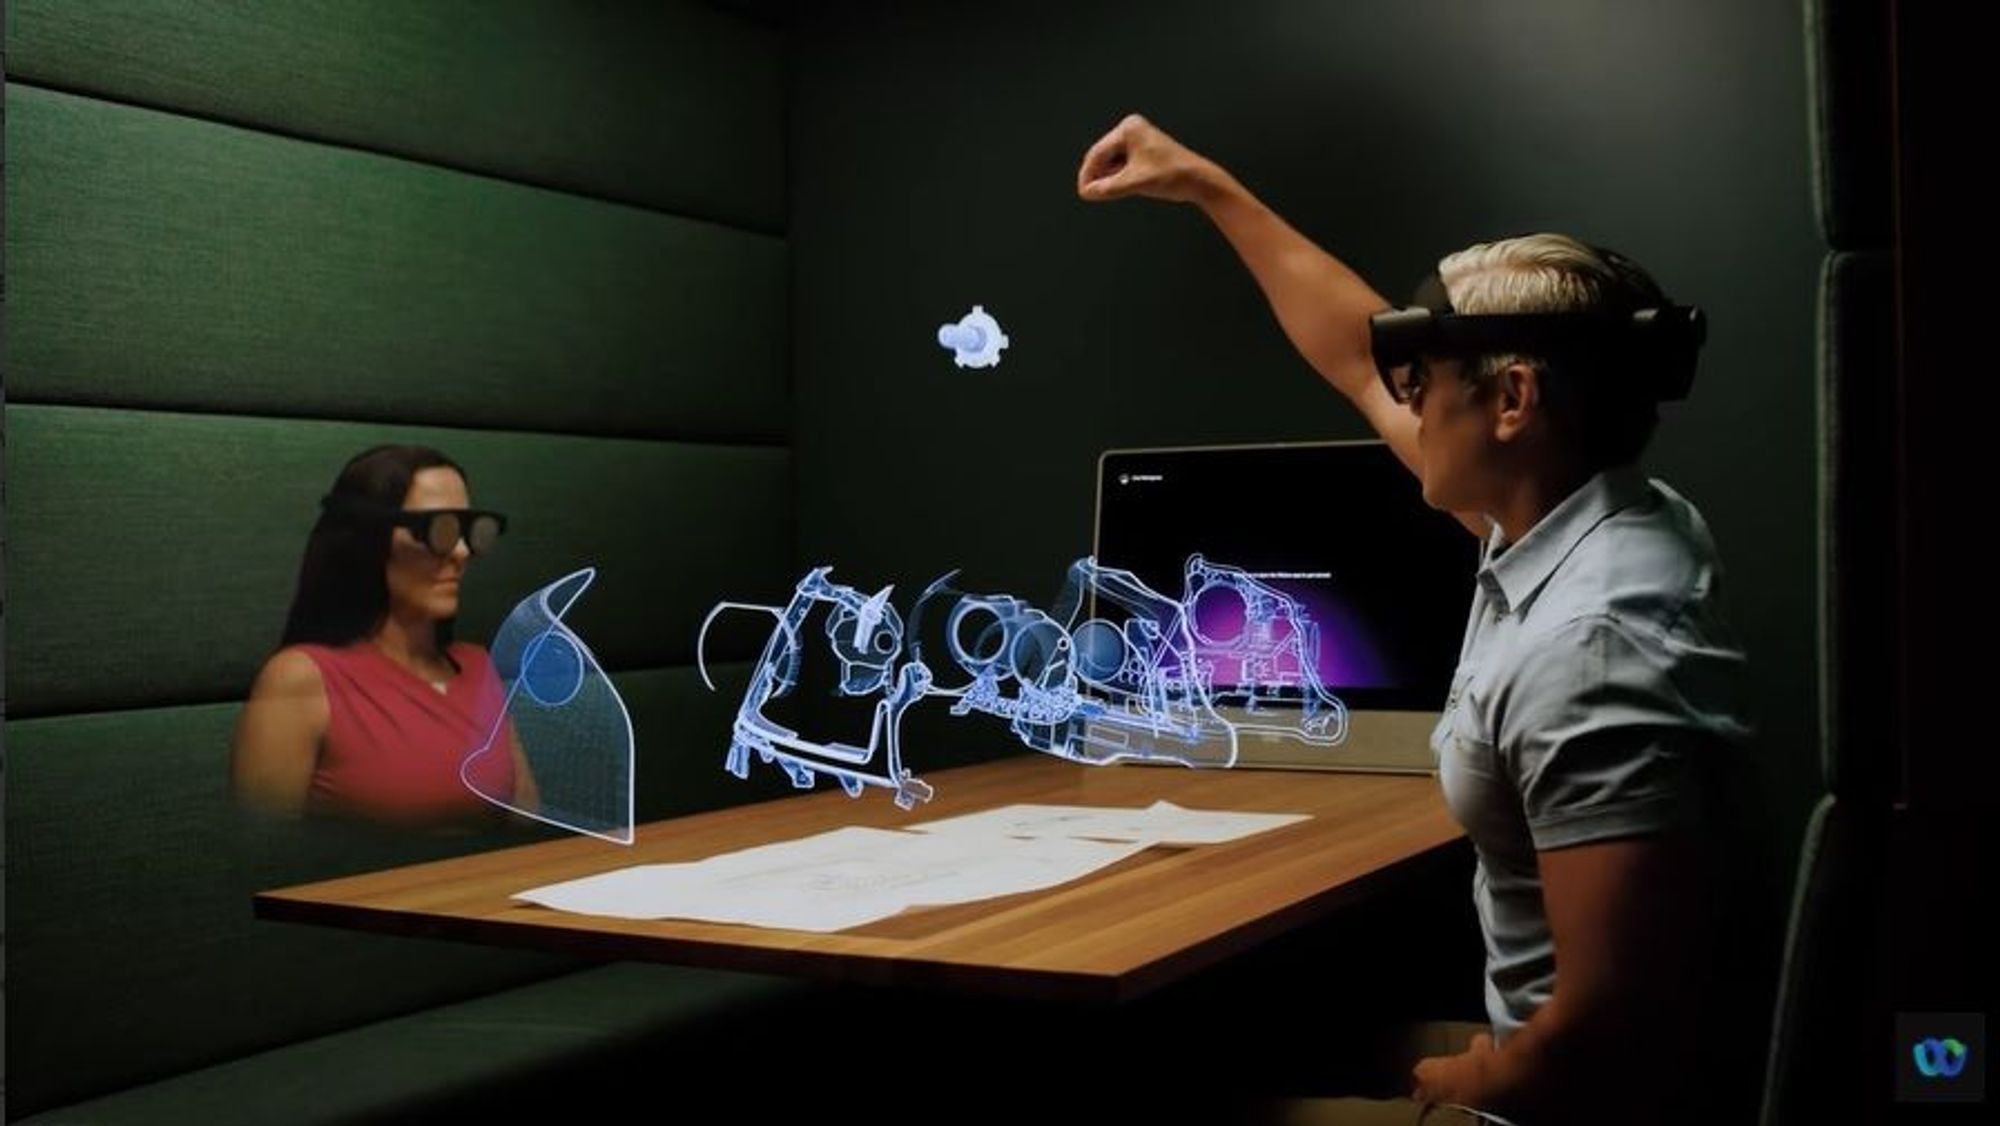 Webex Hologram: Taking virtual meetings to a whole new level | IT World Canada News